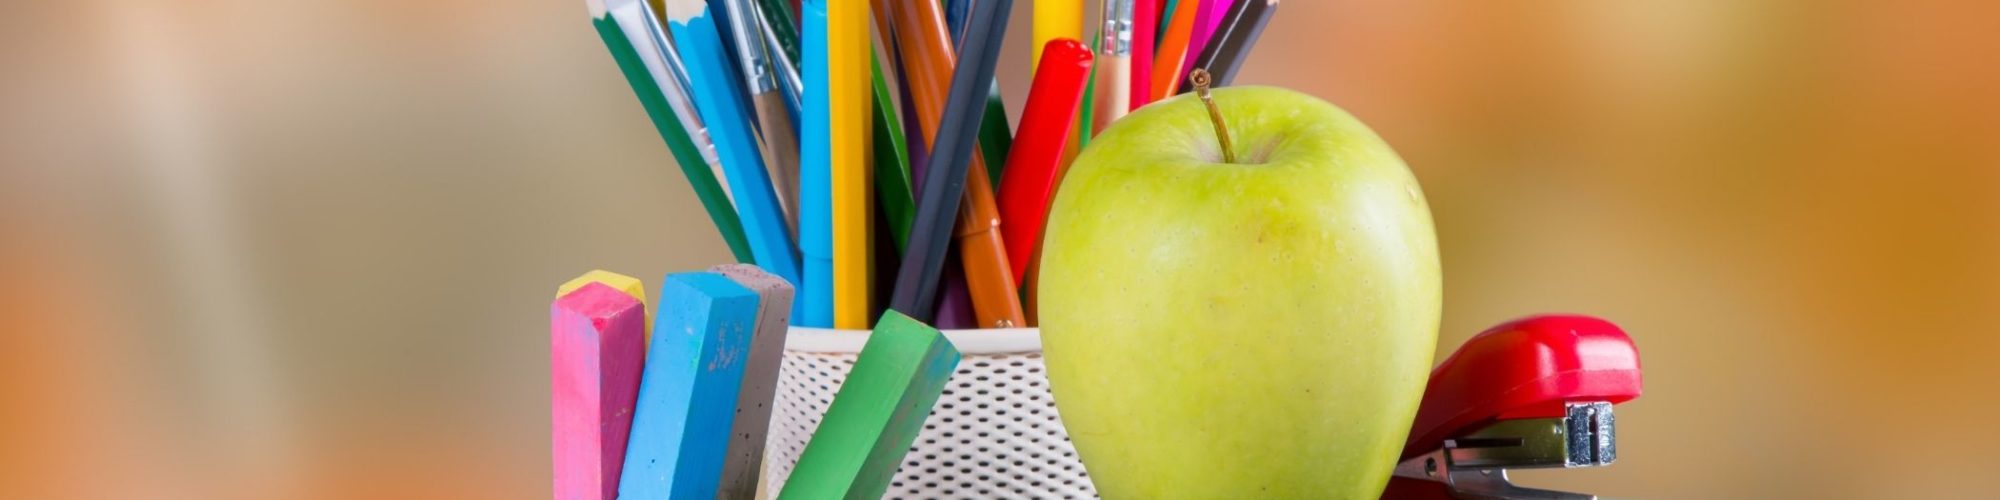 Picture of School Supplies and Apple